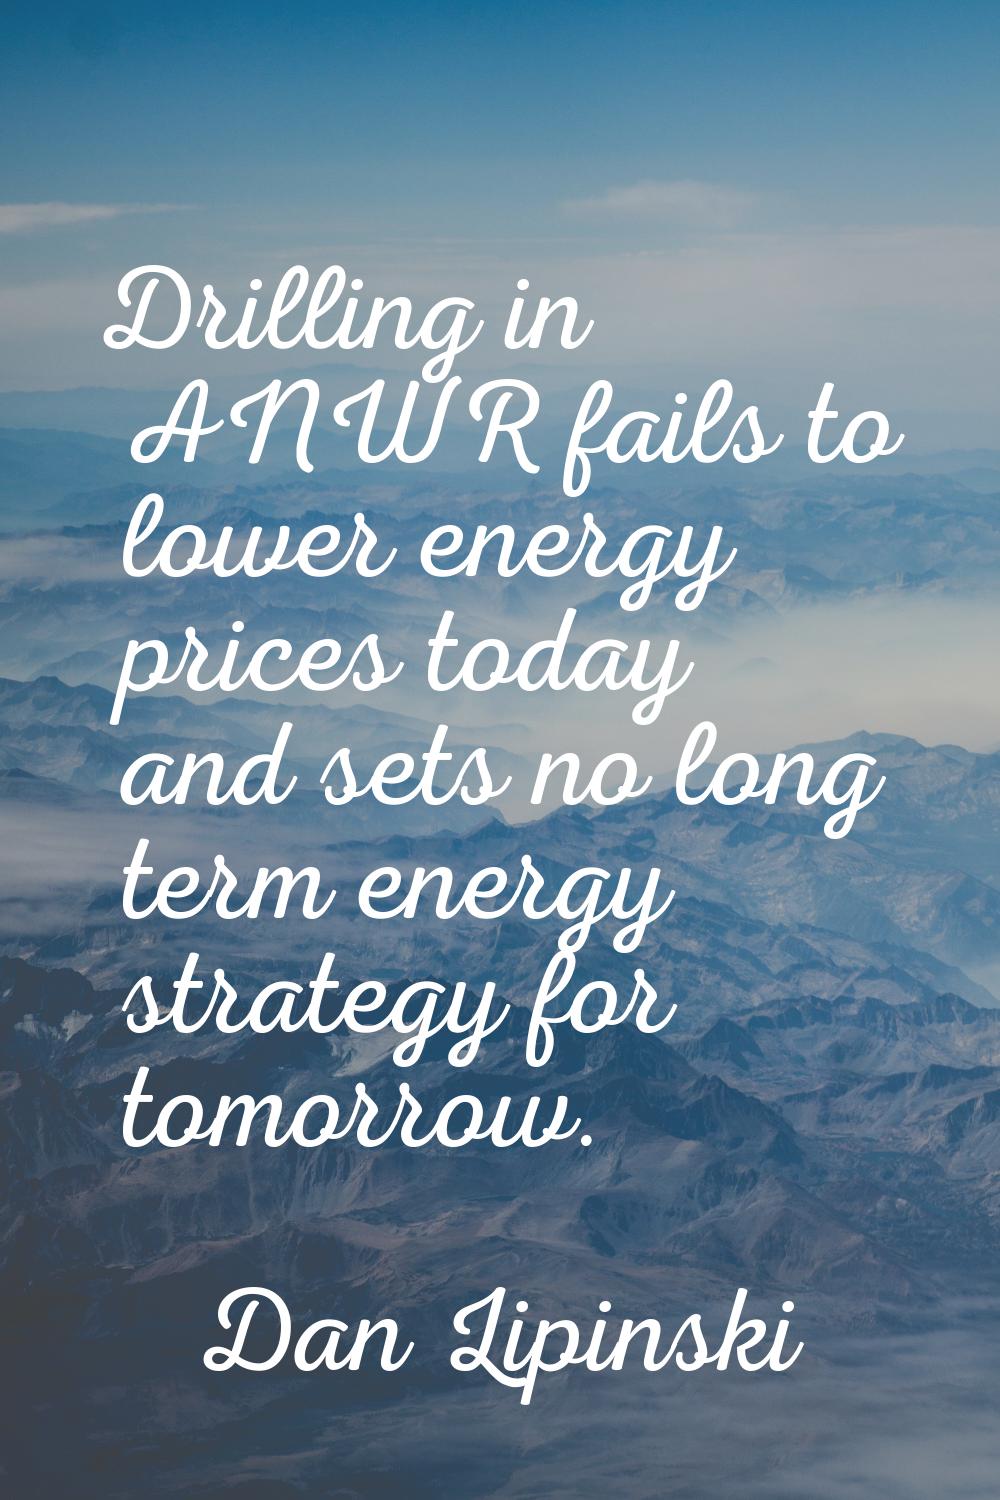 Drilling in ANWR fails to lower energy prices today and sets no long term energy strategy for tomor